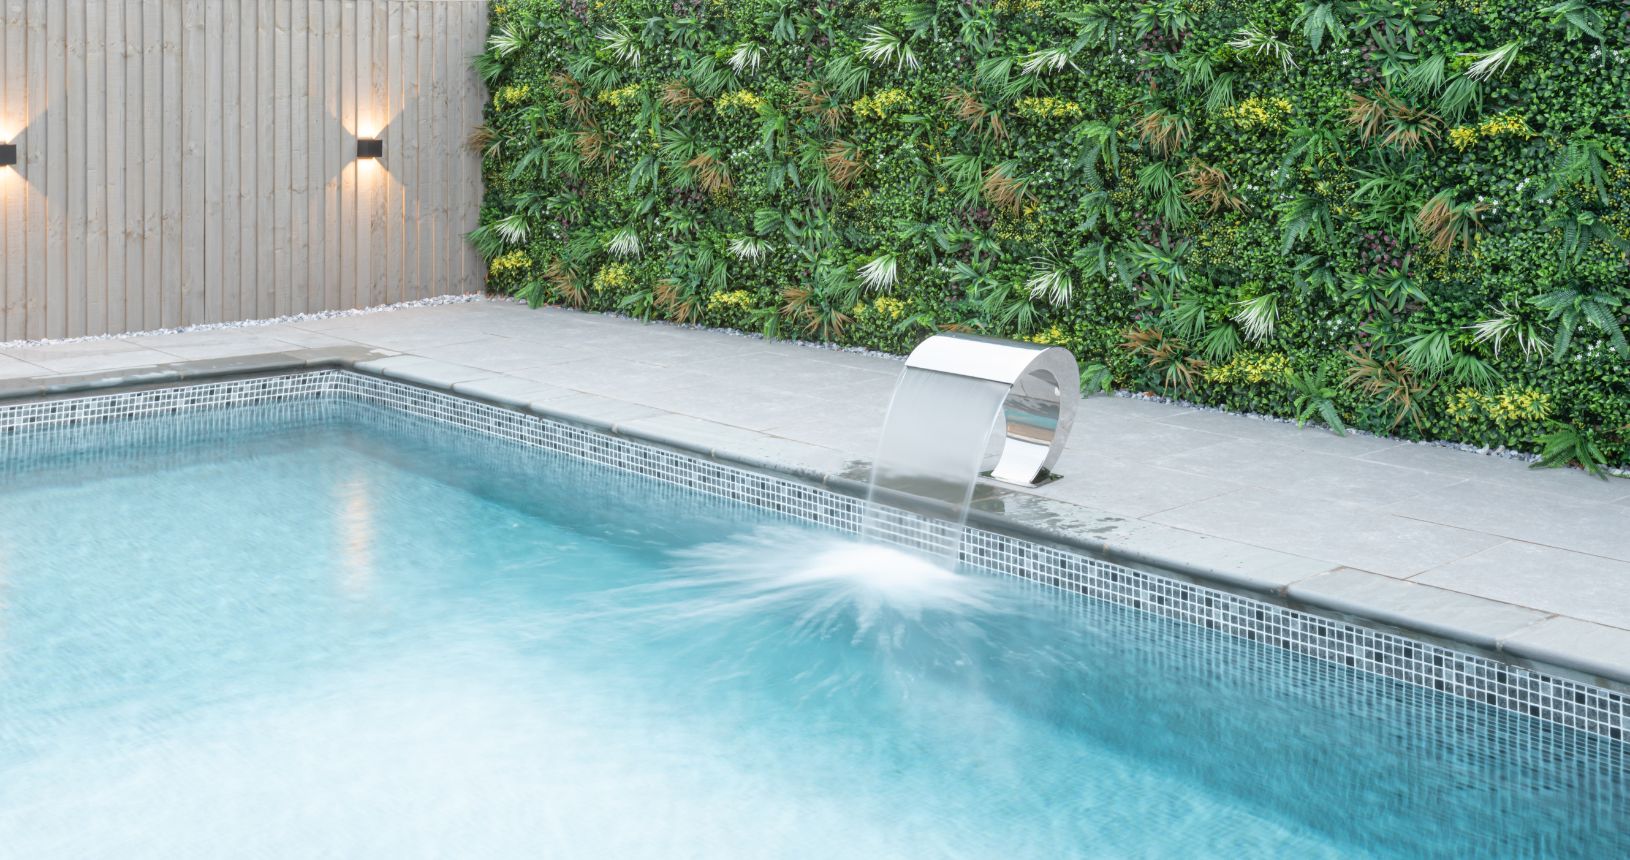 Outdoor swimming pools